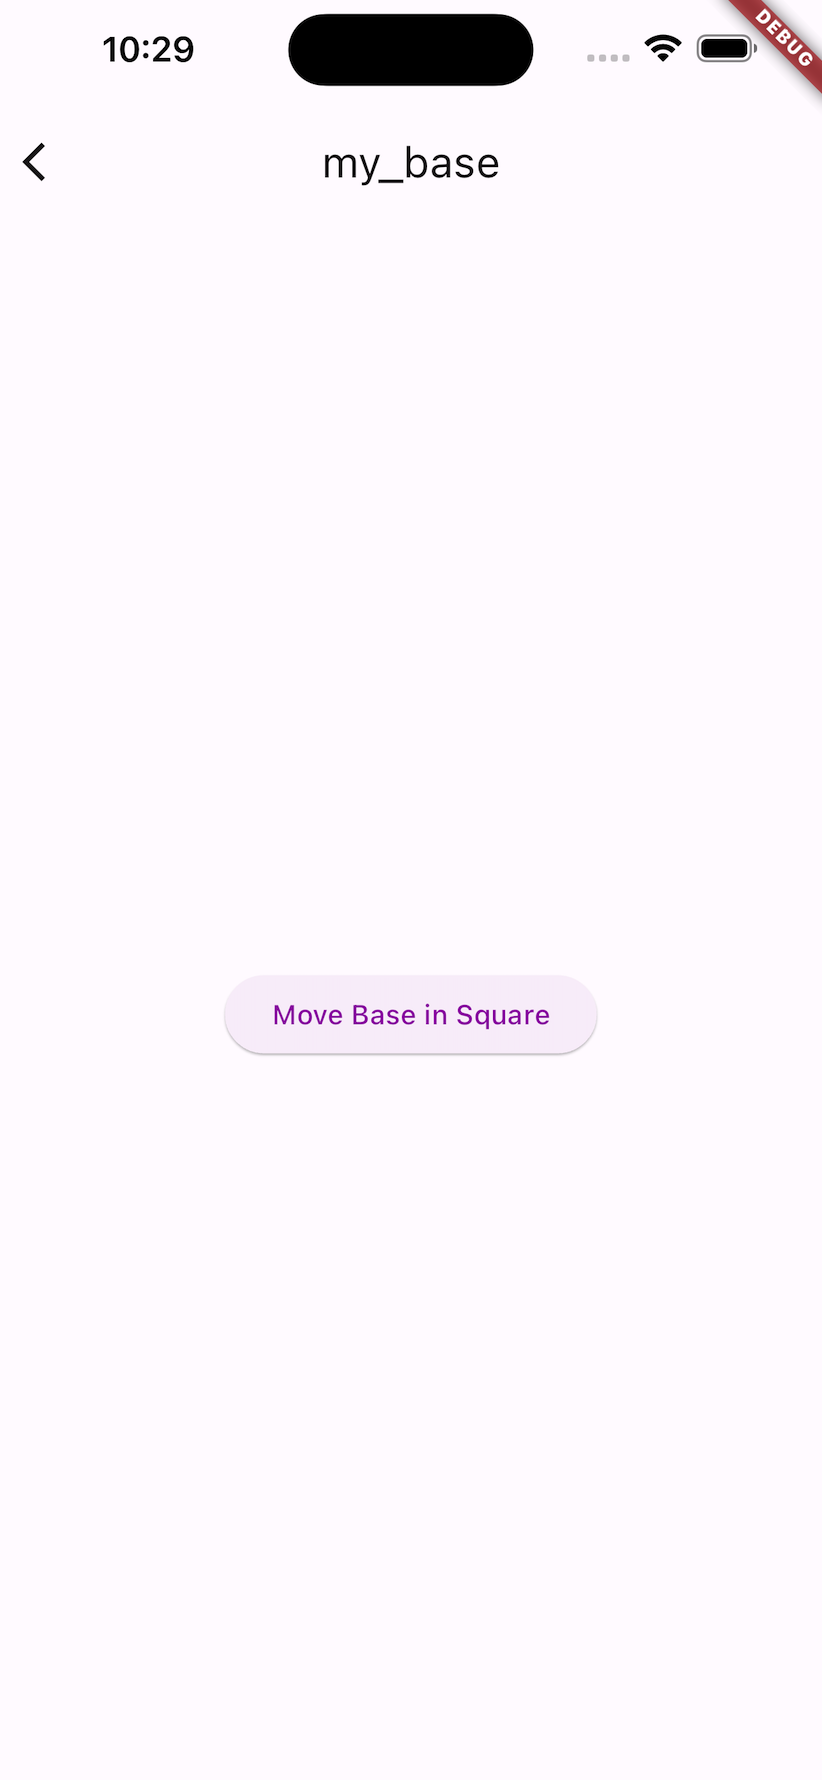 Button to drive a rover in a square in an example Flutter app